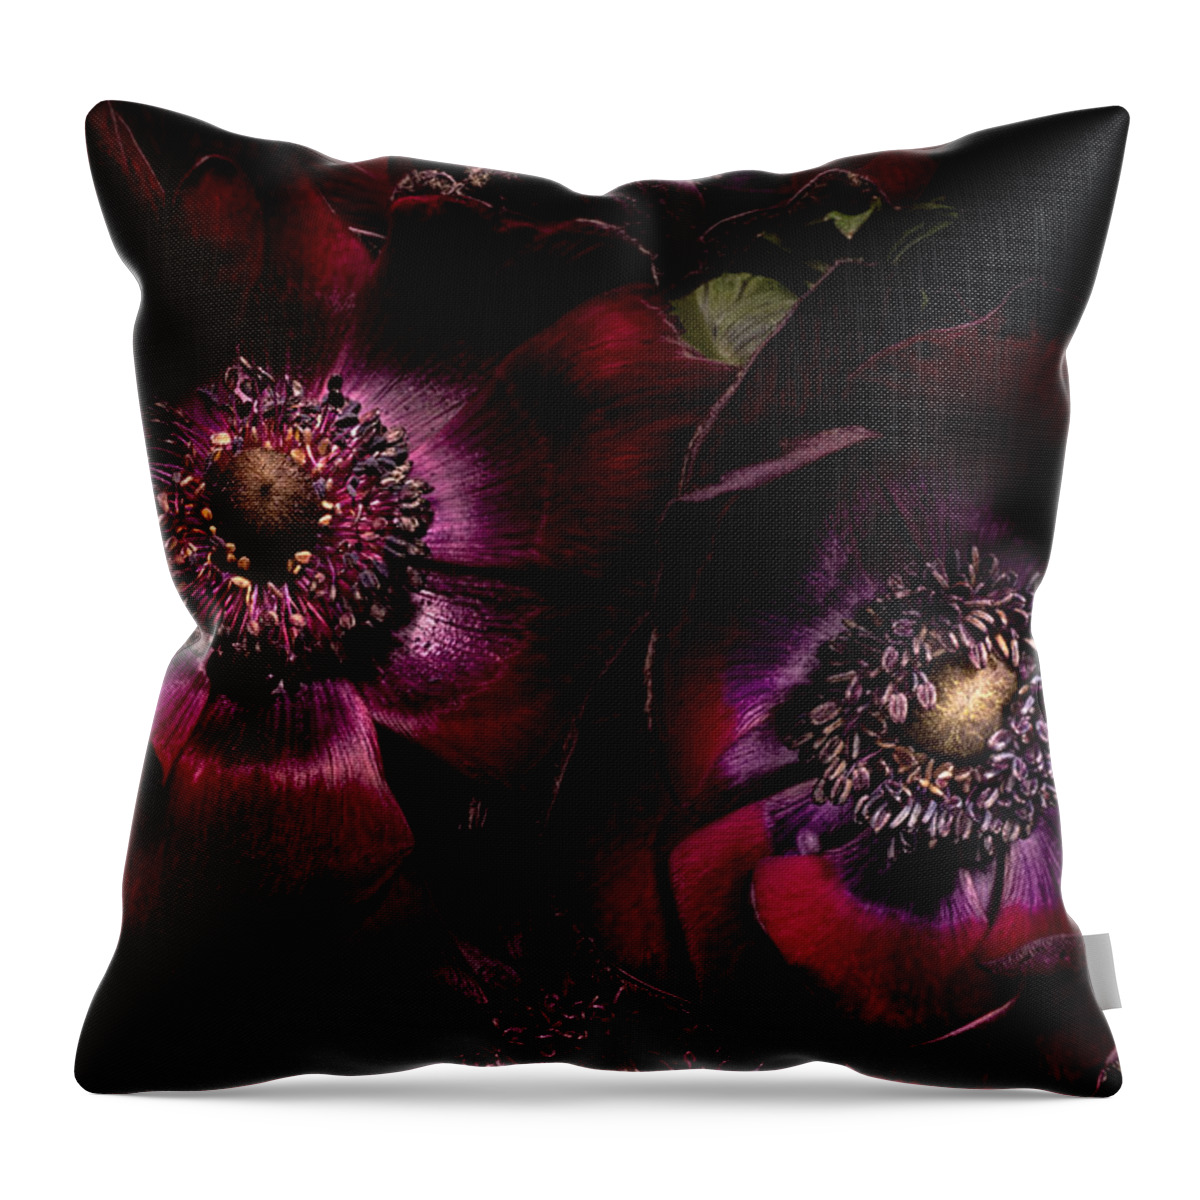 Anemone Throw Pillow featuring the photograph Blood Red Anemones by Ann Garrett